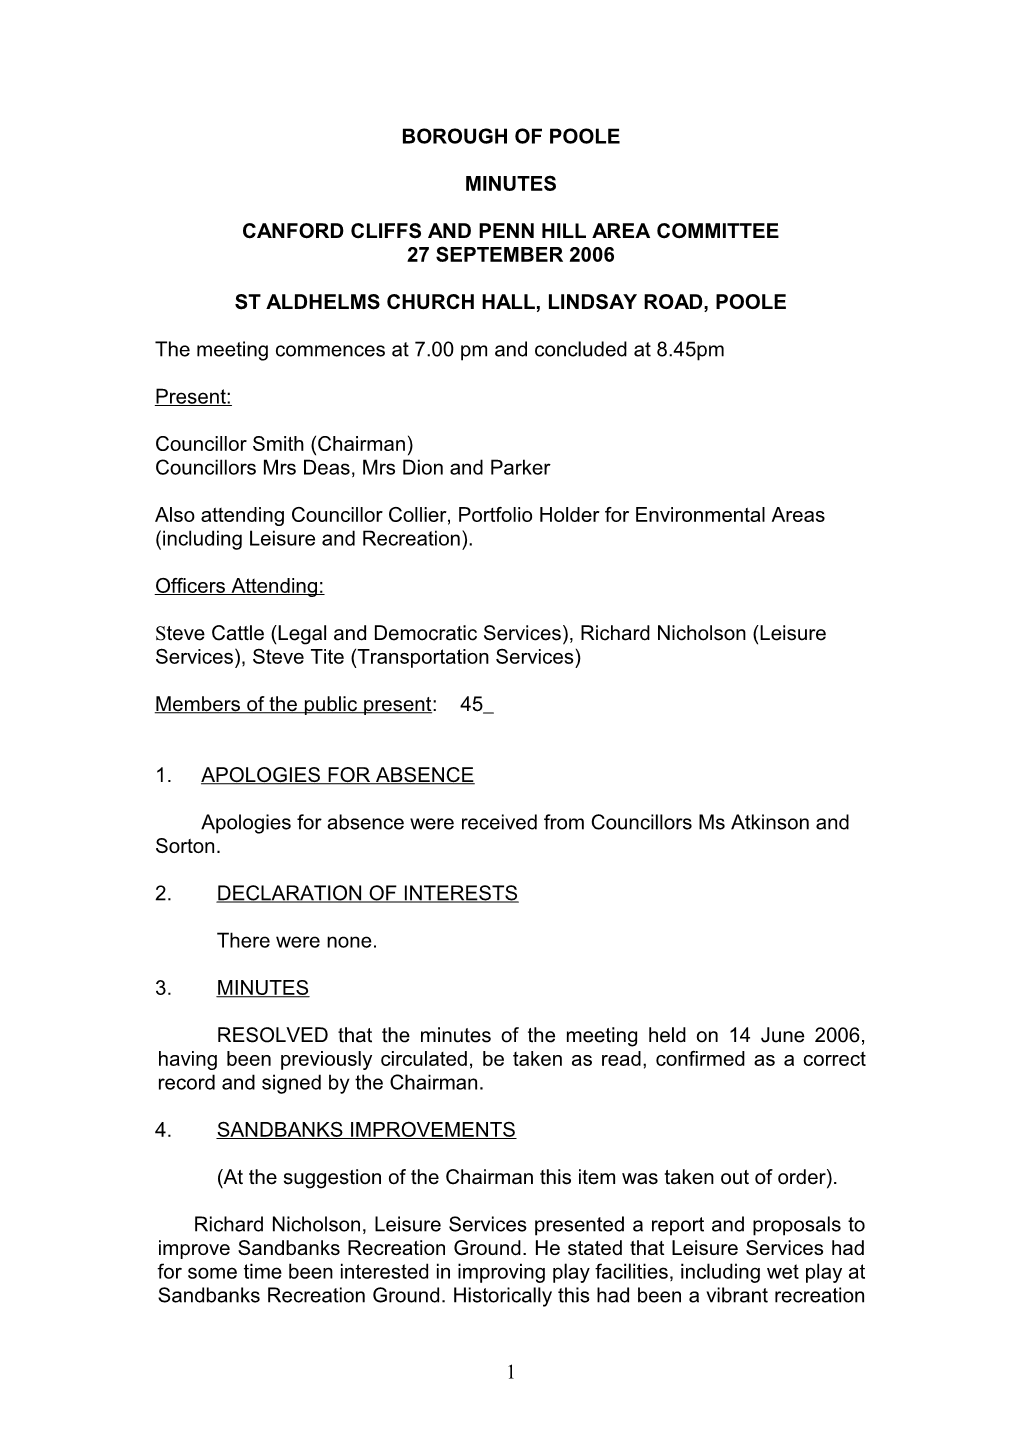 Minutes - Canford Cliffs and Penn Hill Area Committee - 27 September 2006